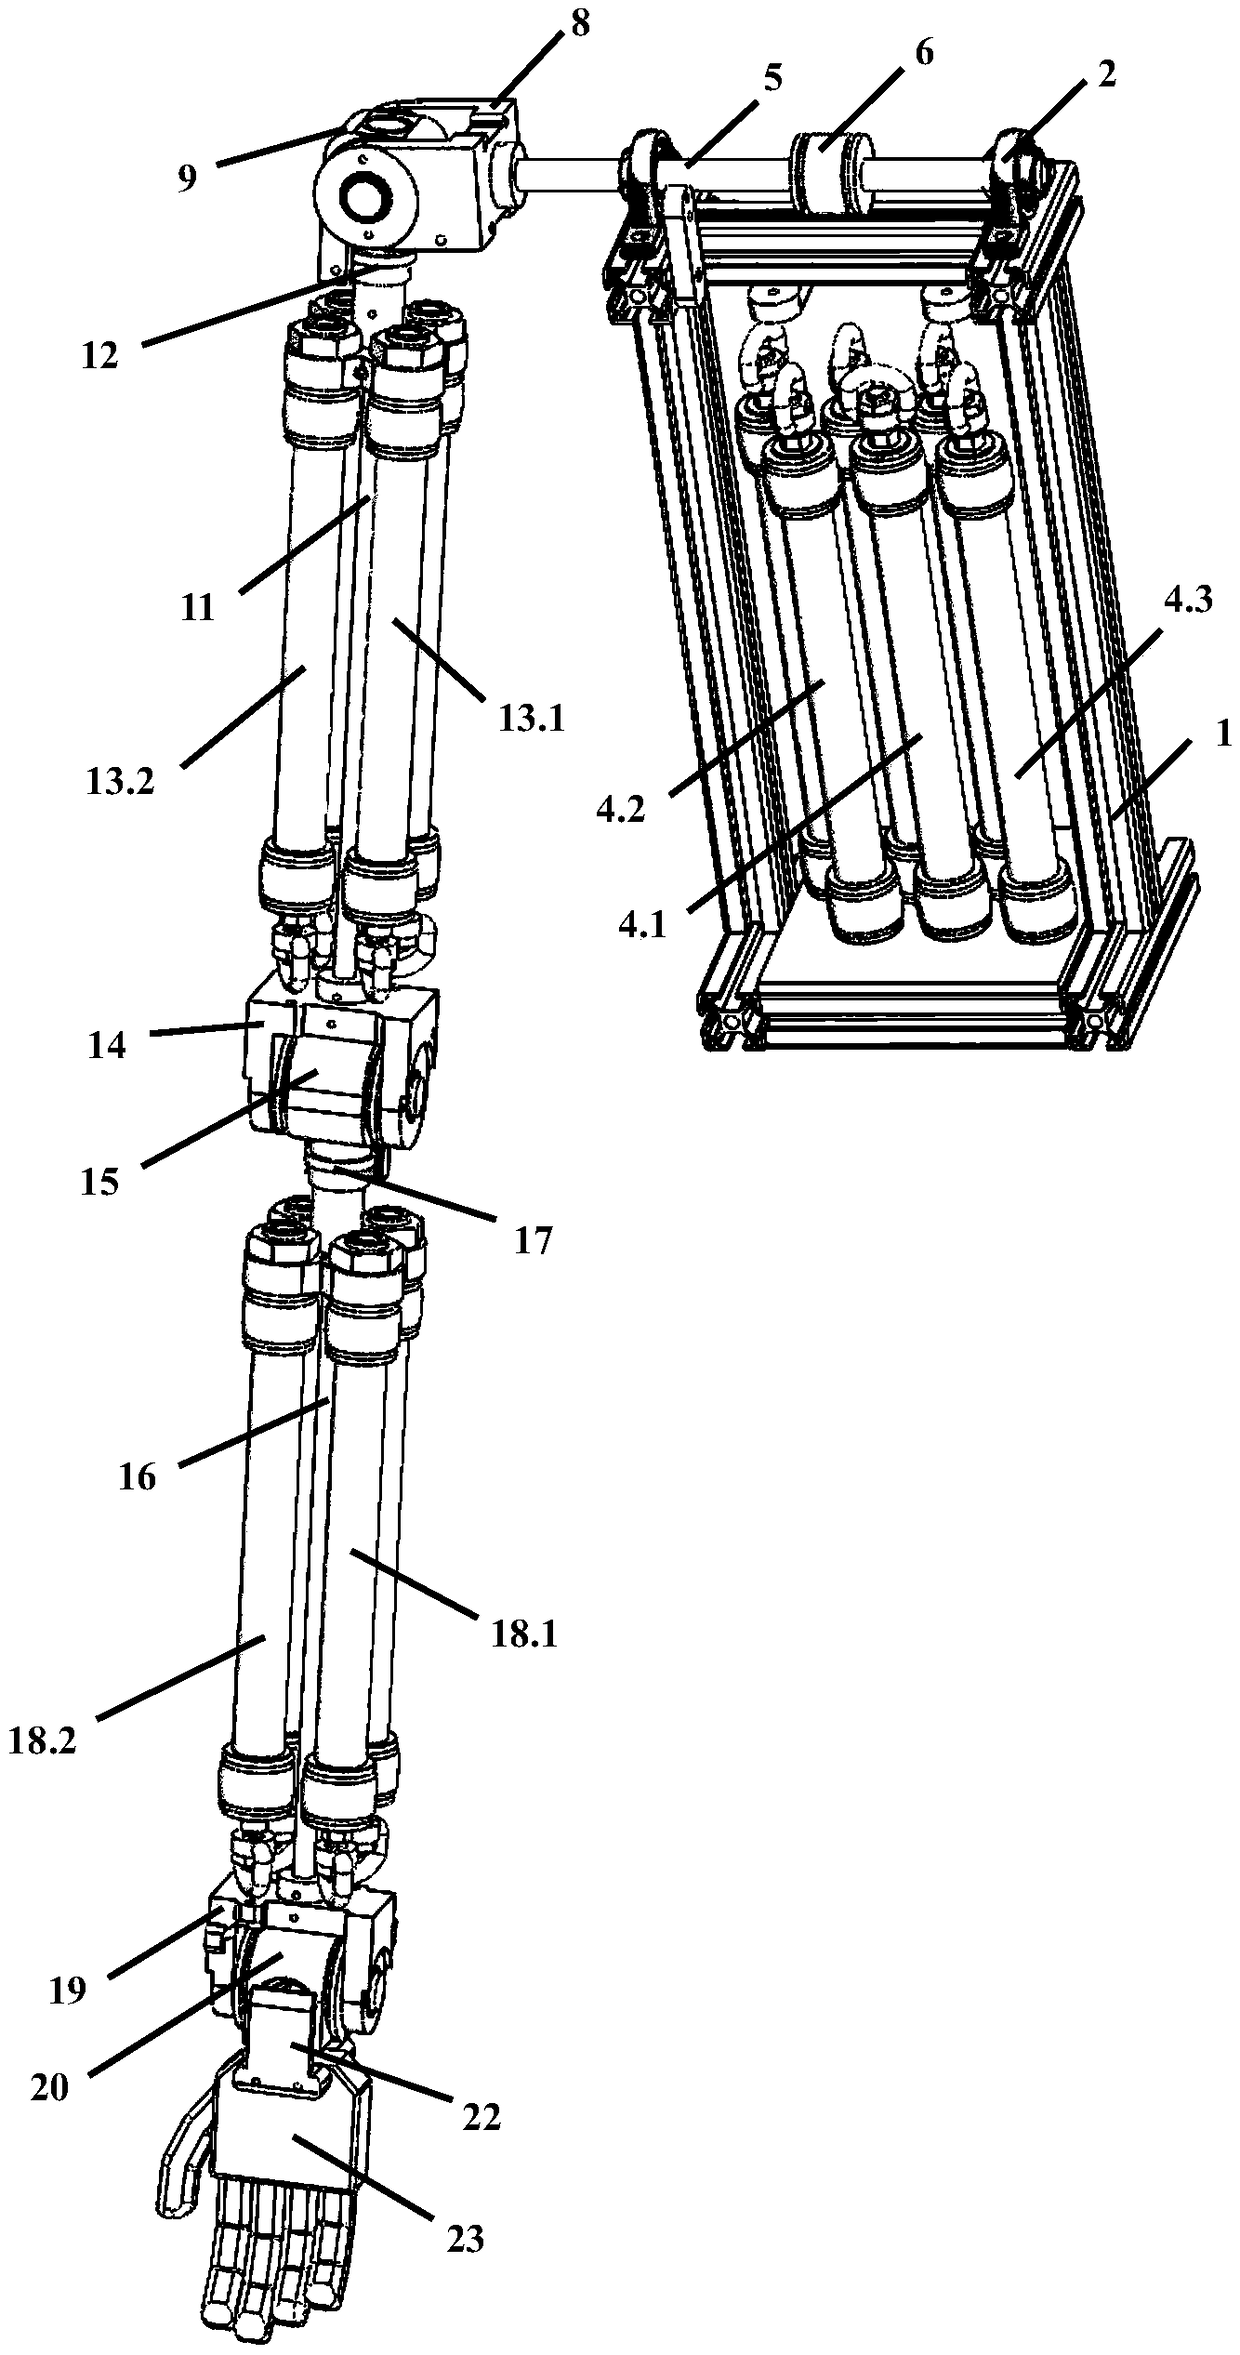 Seven-degree-of-freedom humanoid mechanical arm driven by pneumatic muscle